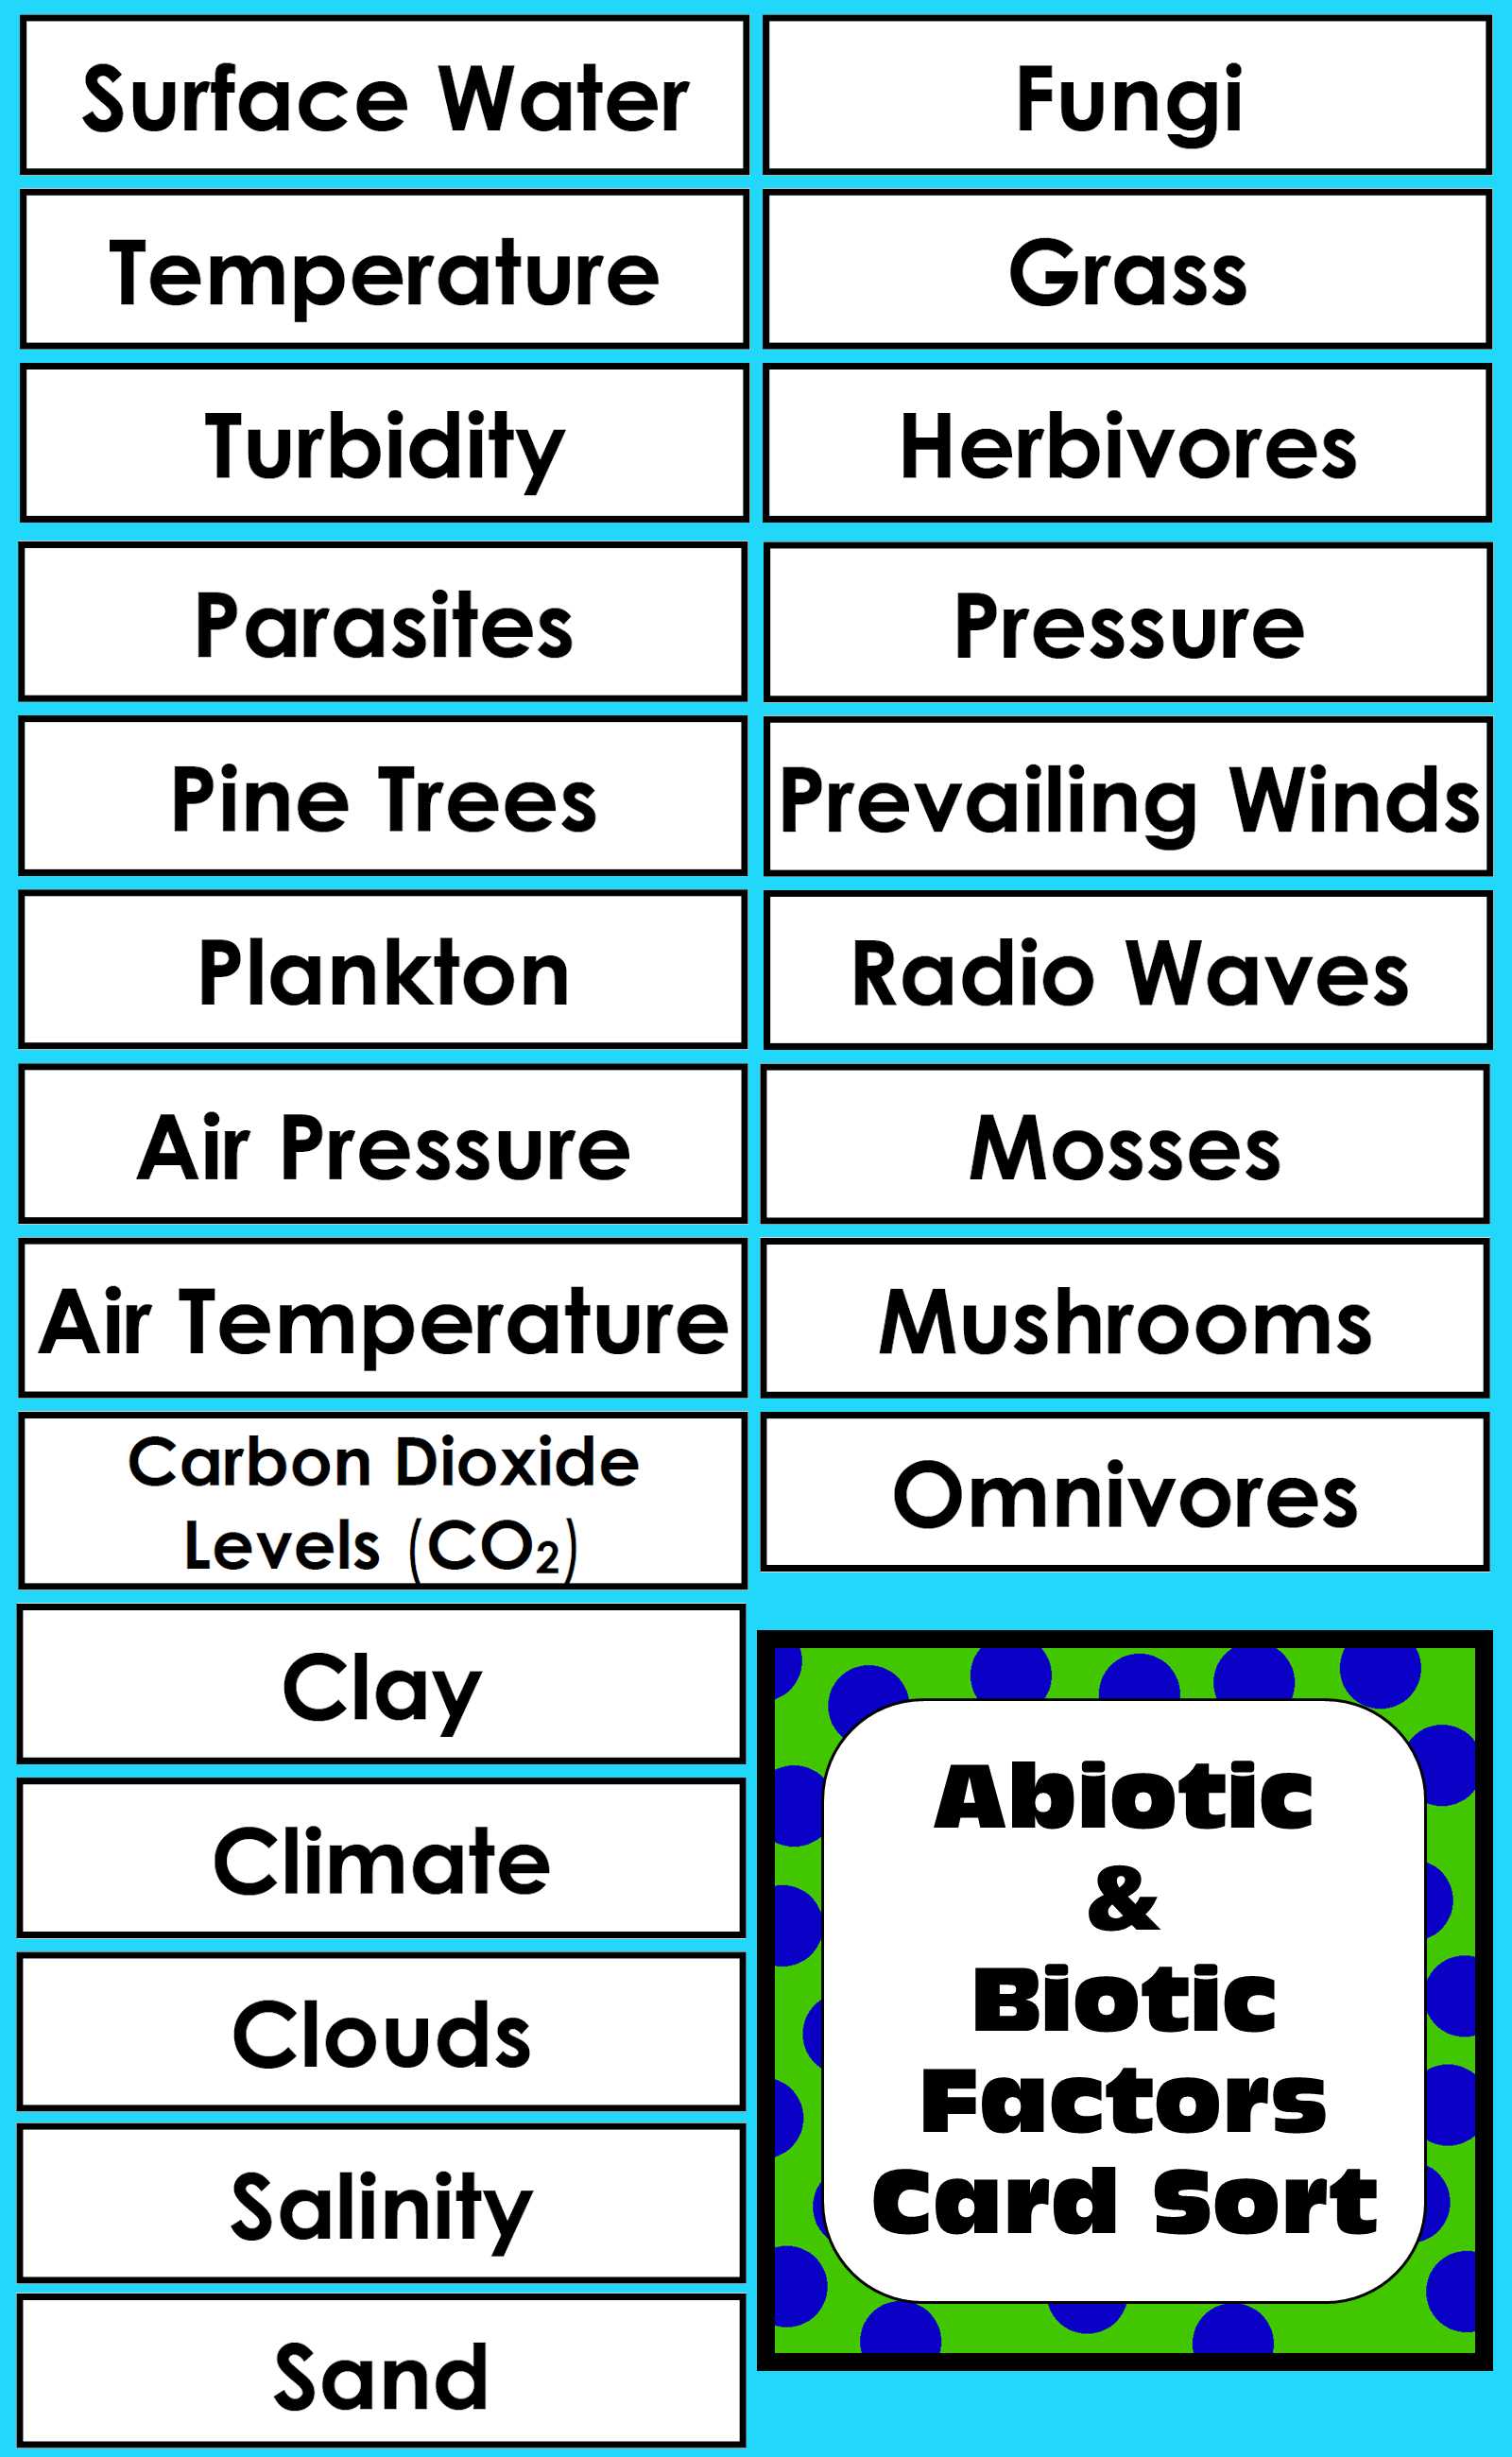 Population Dynamics Worksheet as Well as Abiotic & Biotic Factors Living & Non Living Things In Ecosystems